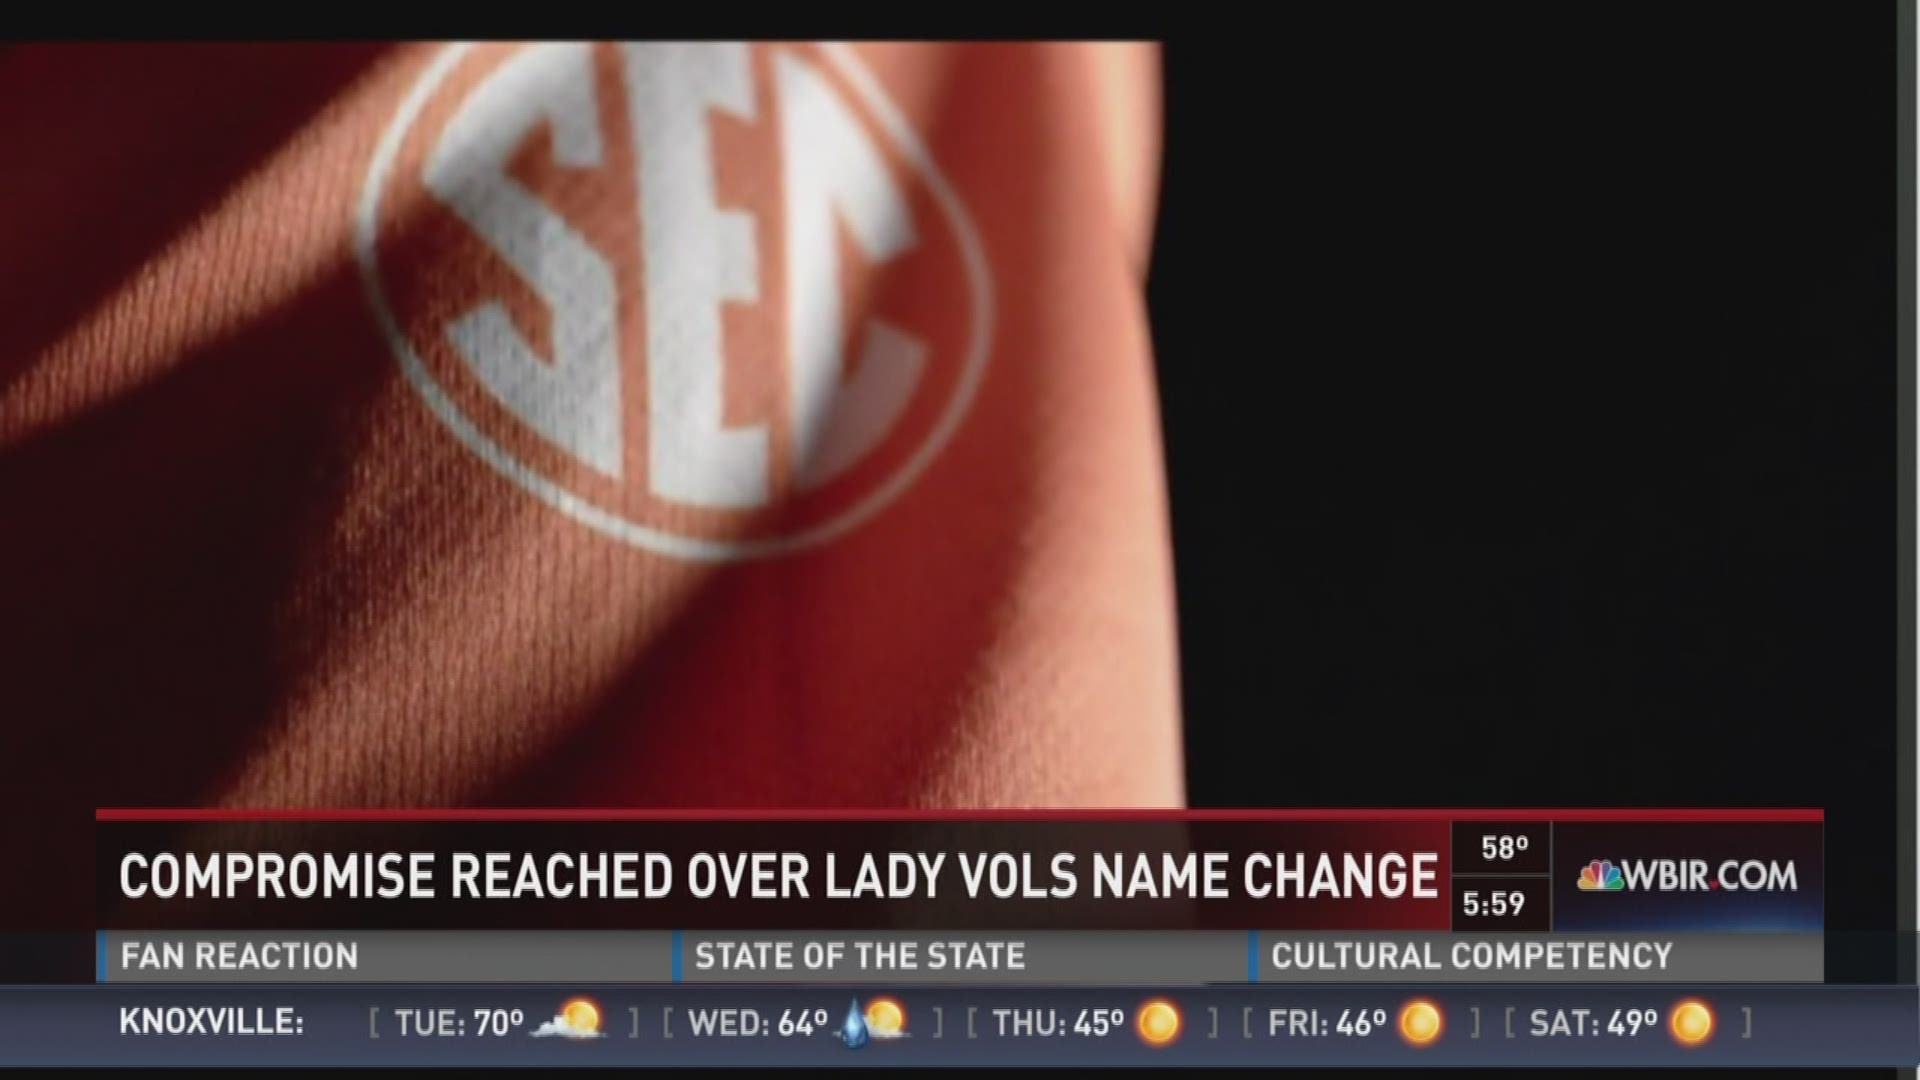 The University of Tennessee says women's athletics teams will wear a Lady Vols patch next season as part of a compromise over dropping the Lady Vols name from most sports. But many say the move doesn't do enough. (2/1/16 6PM)